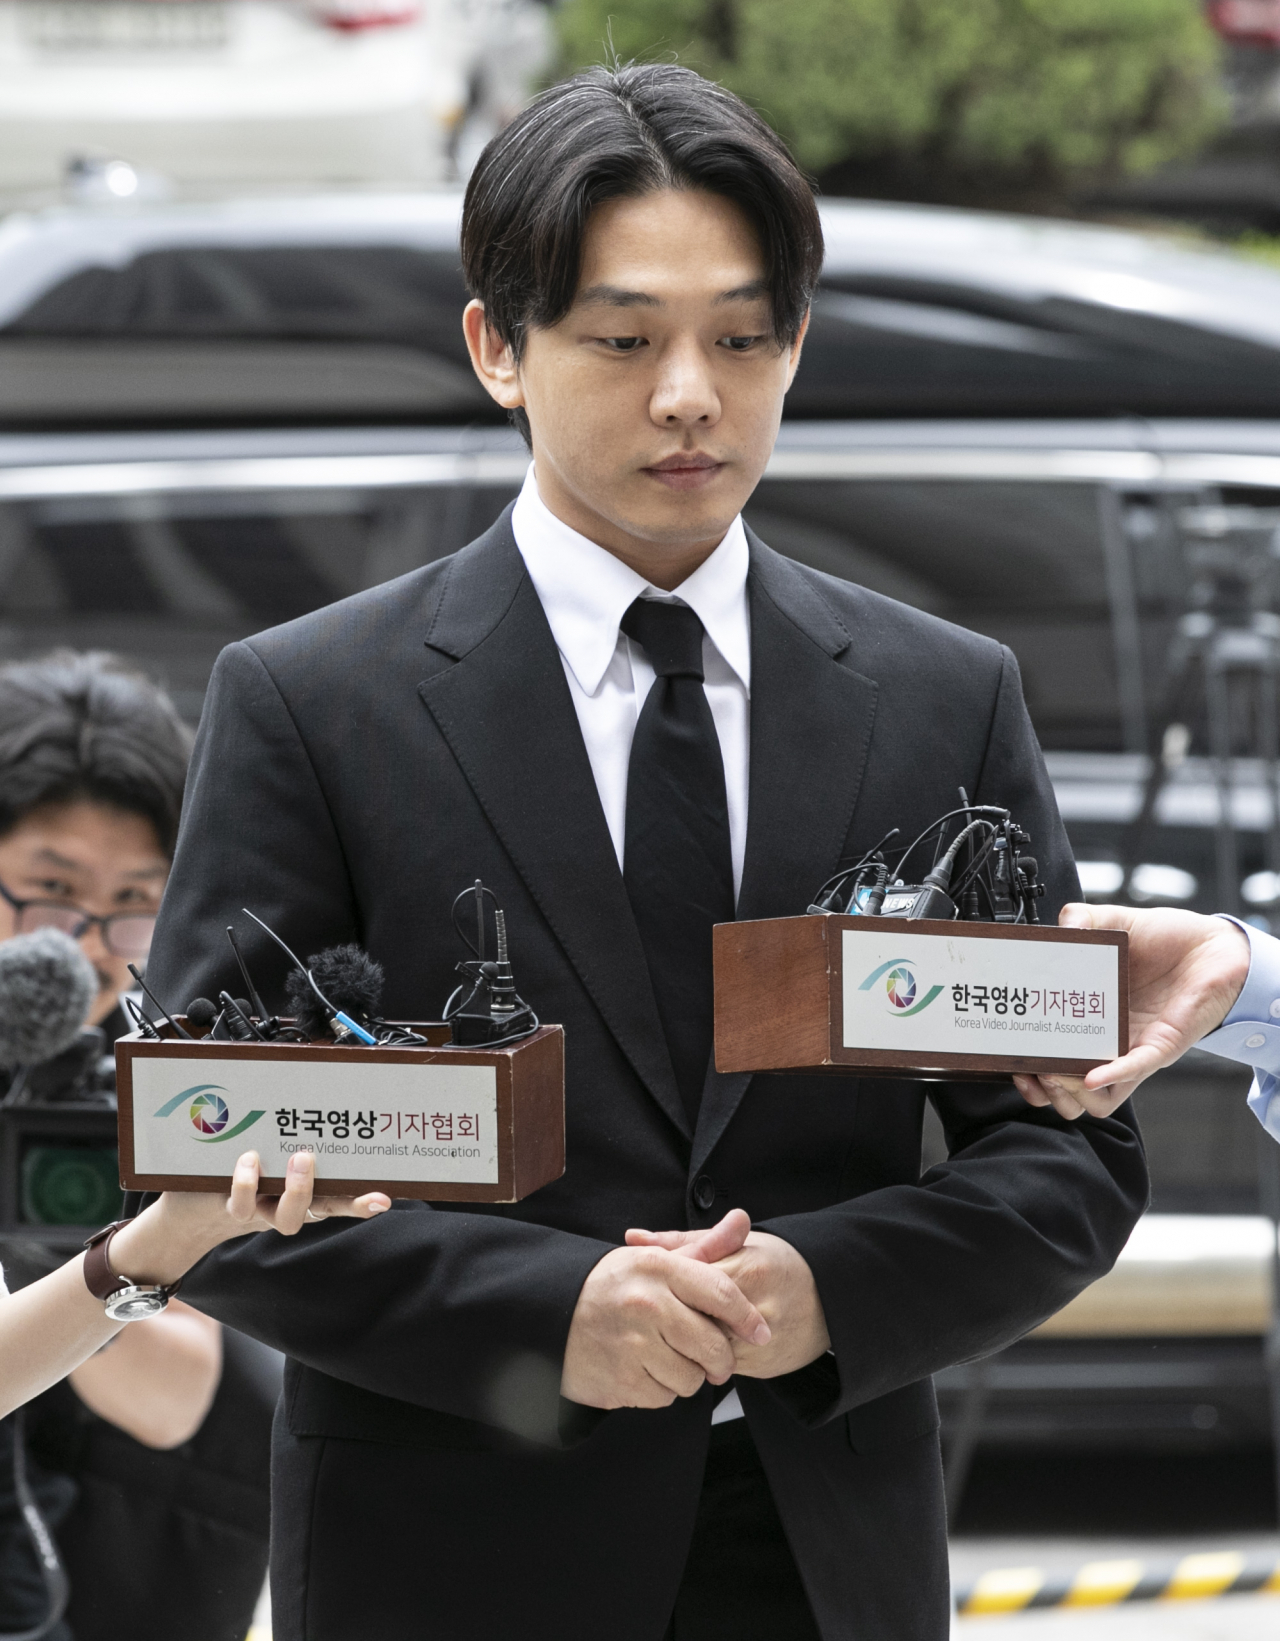 Actor Yoo Ah-in attends a court hearing at the Seoul Central District Court in southern Seoul on Wednesday. (Yonhap)